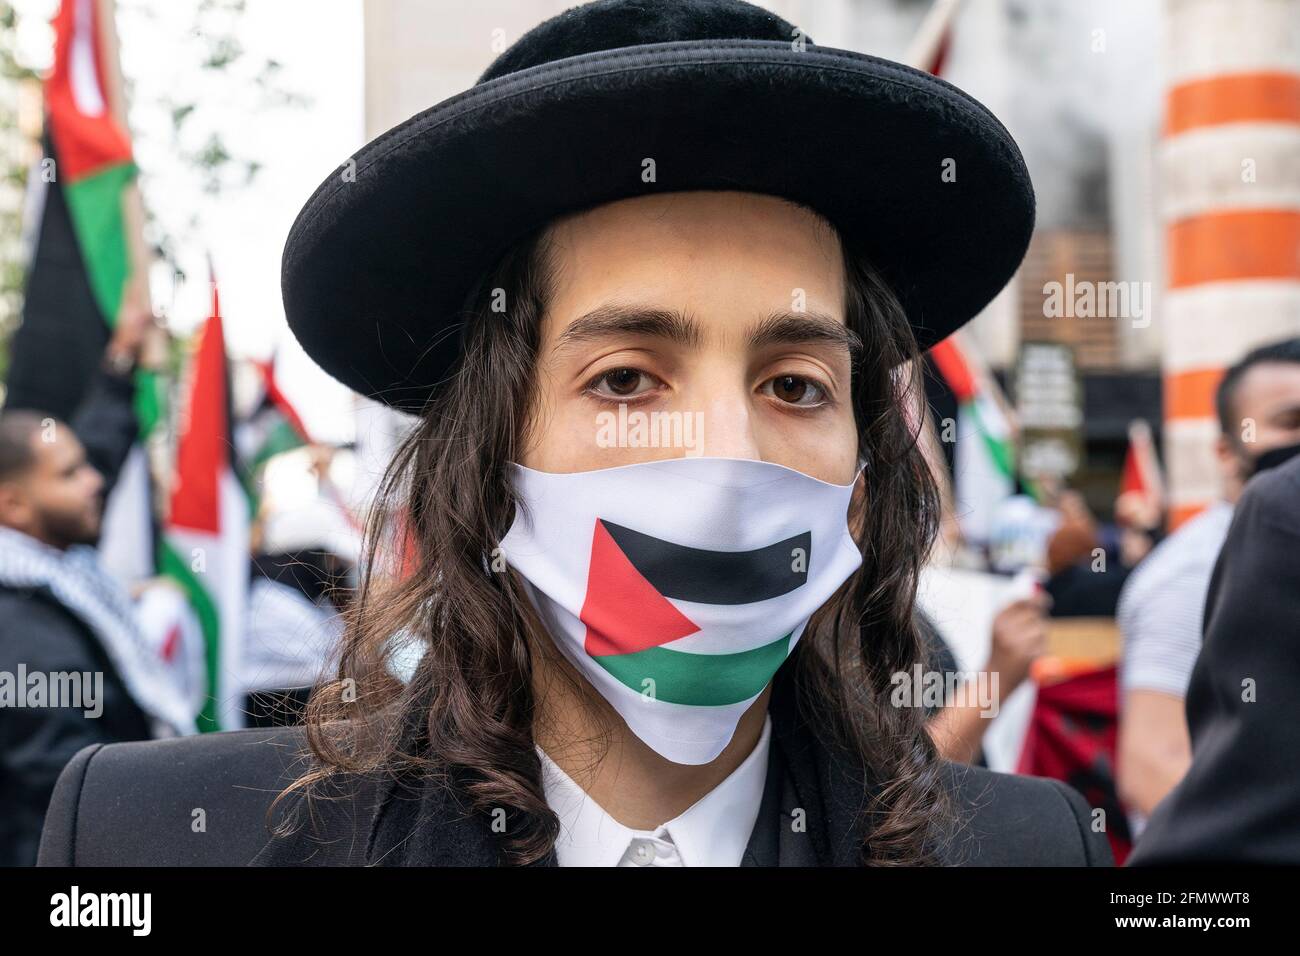 Hundreds of people participated in a rally and march in support of Palestine on 42nd street in Manhattan in New York on May 11, 2021. Protesters rally in support of Palestinians who clashed with Israeli police in anticipation of a court ruling to evict them from some places in East Jerusalem. Protesters were joined by some Orthodox Jews from Anti-Zionists sect Neturei Karta who oppose the state of Israel. Many protesters were wearing Palestinian scarf - keffiyeh. There was also a counter protest by about two dozen Jewish supporters of Israel, but they were vastly outnumbered by supporters of P Stock Photo